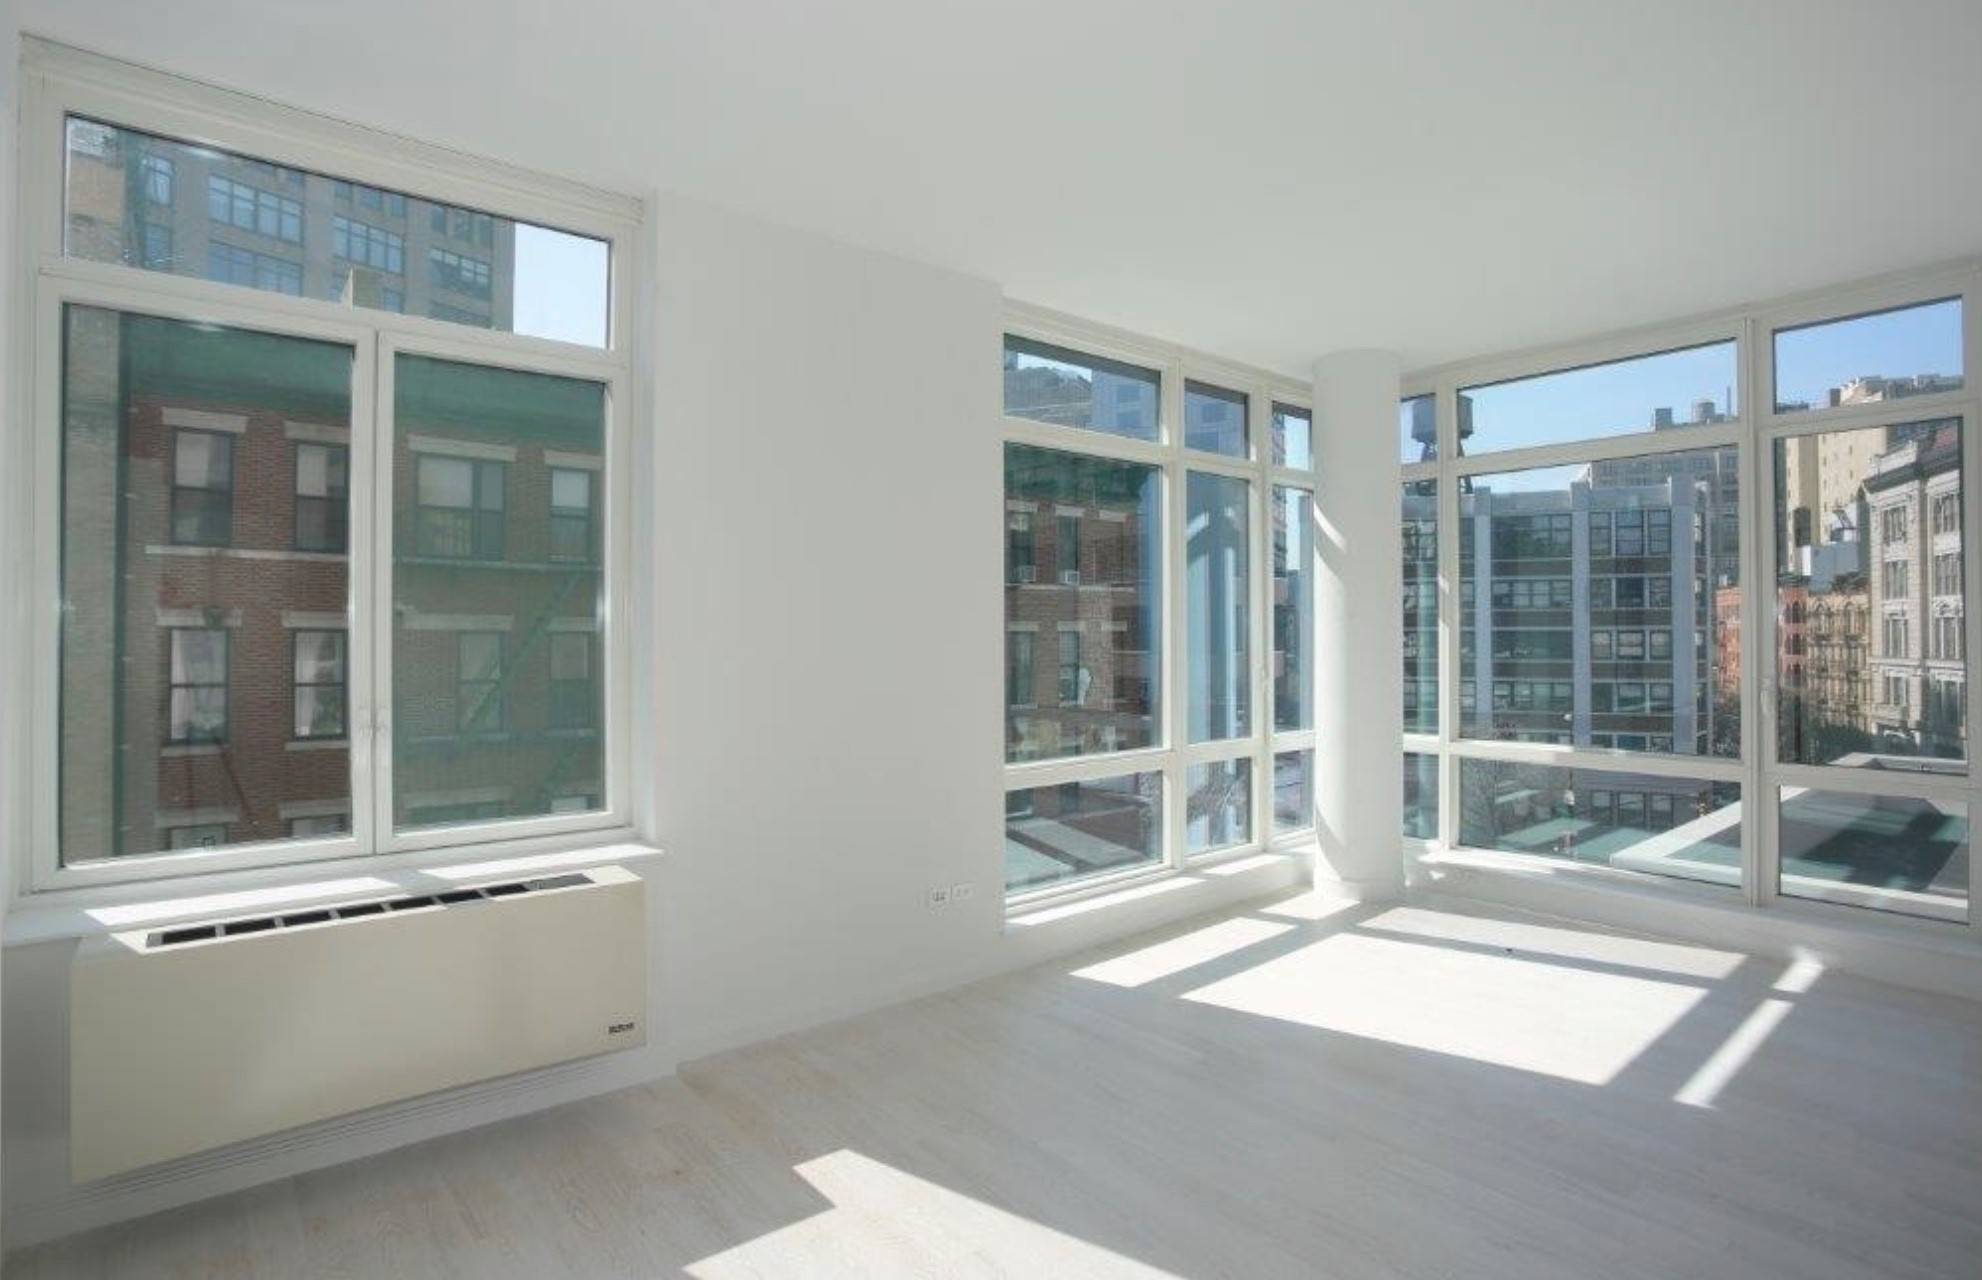 NO FEE. Stunning 2 bed/2 bath with large balcony in this chic luxury building in the heart of Soho.